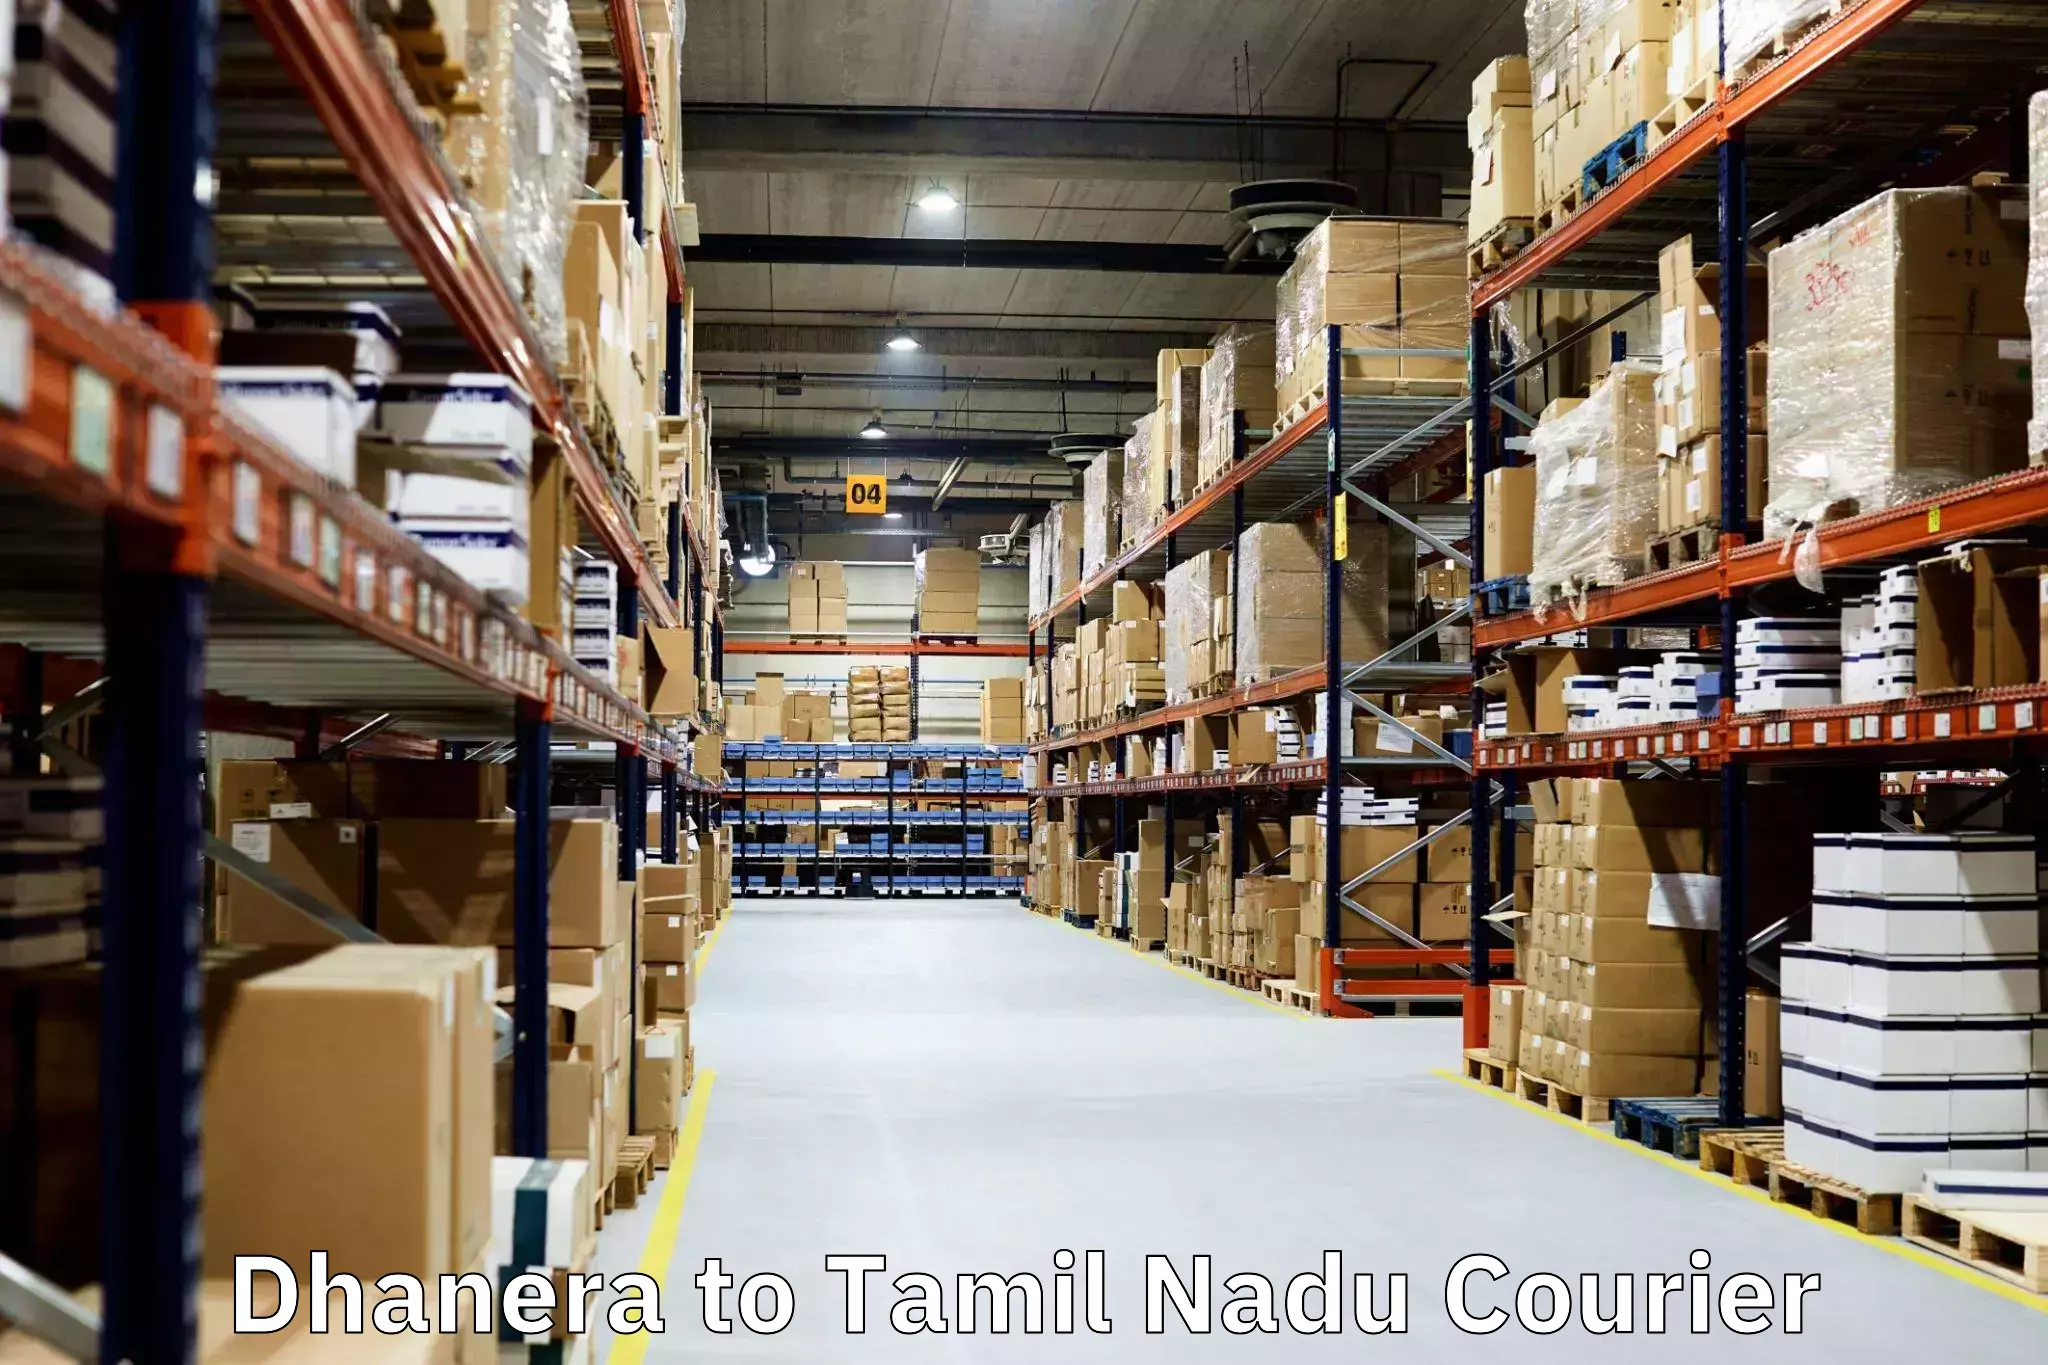 Home moving specialists Dhanera to Tamil Nadu